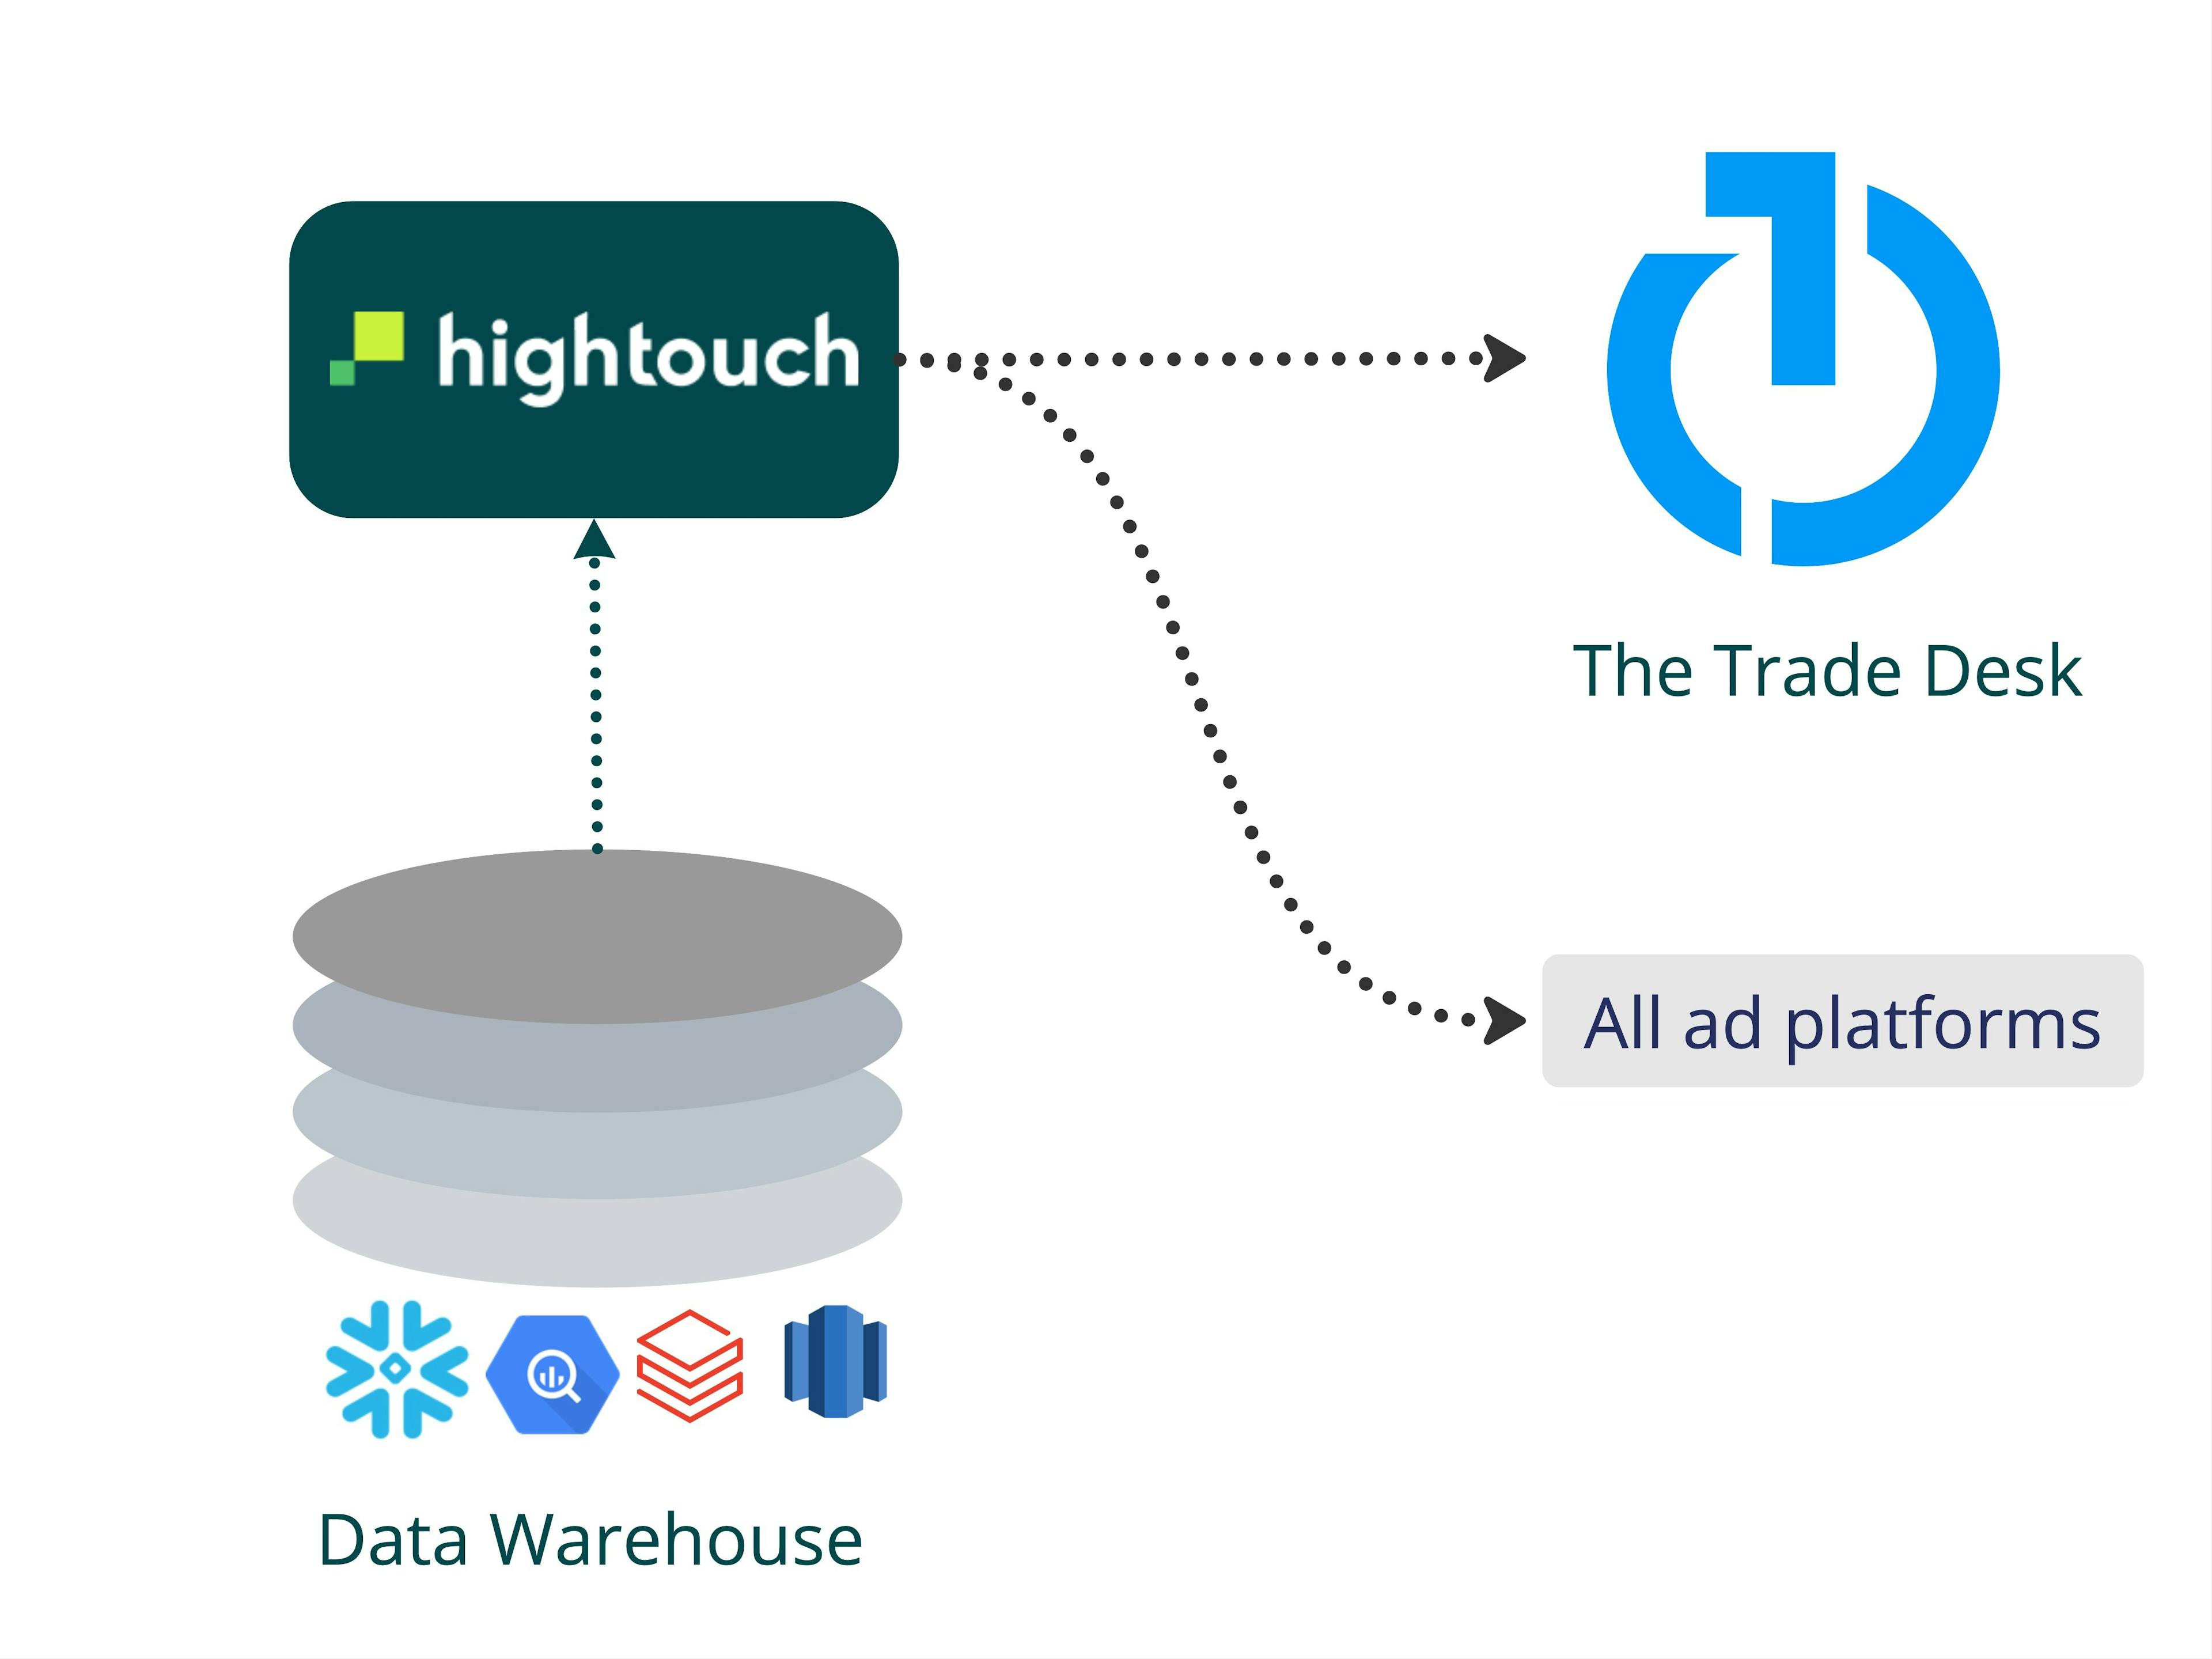 Hightouch architecture with The Trade Desk